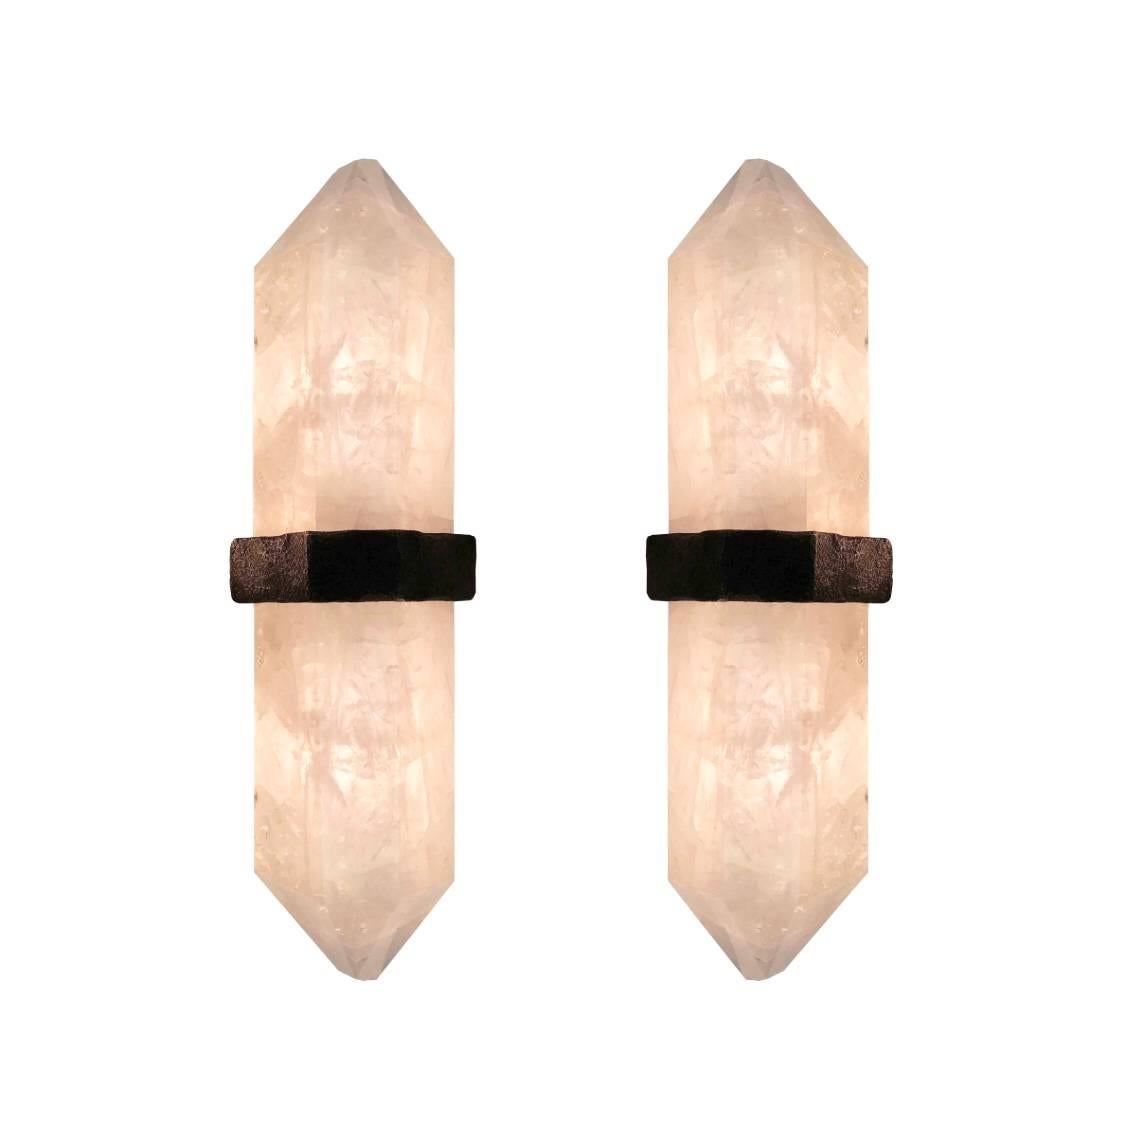 A fine carved diamond form rock crystal quartz wall sconces, mount with rich texture of cast brass decoration, created by Phoenix gallery NYC. Custom size available
Each sconce installed two sockets, and will including two LED light bulbs with 60